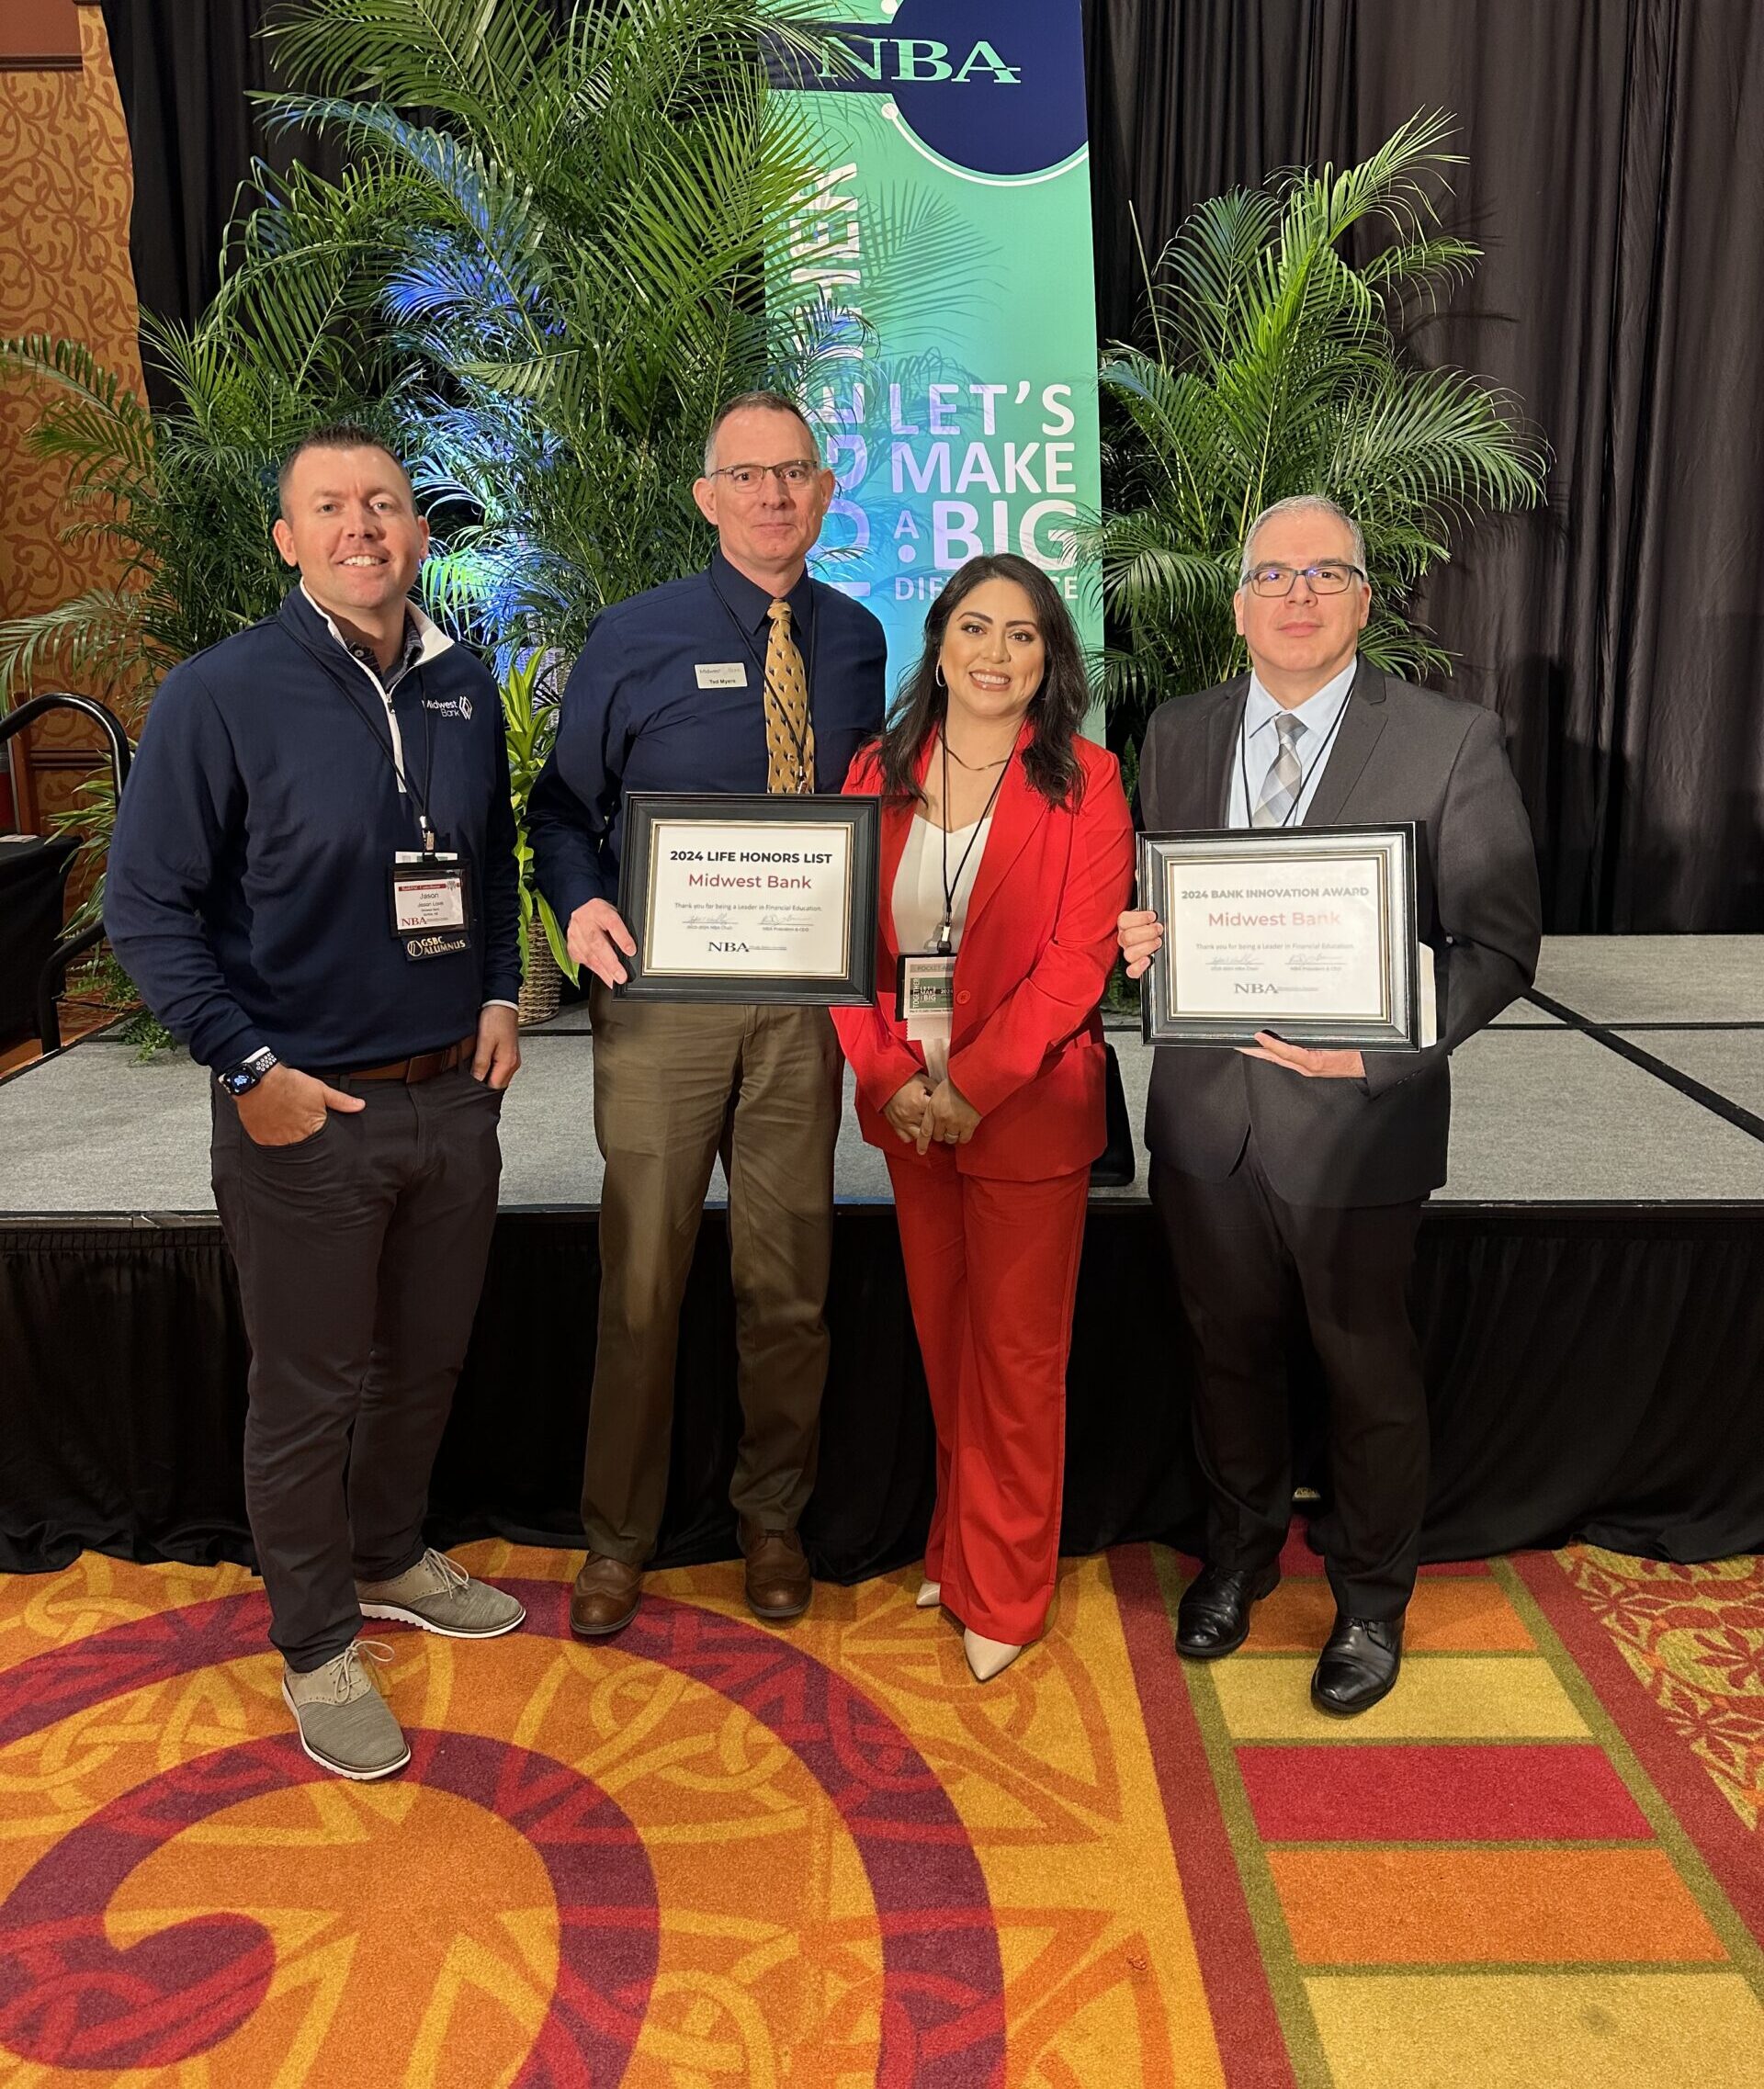 Midwest Bank received the Bank Innovation Award at the NBA Annual Convention for implementing innovative ways to improve financial literacy in our communities.